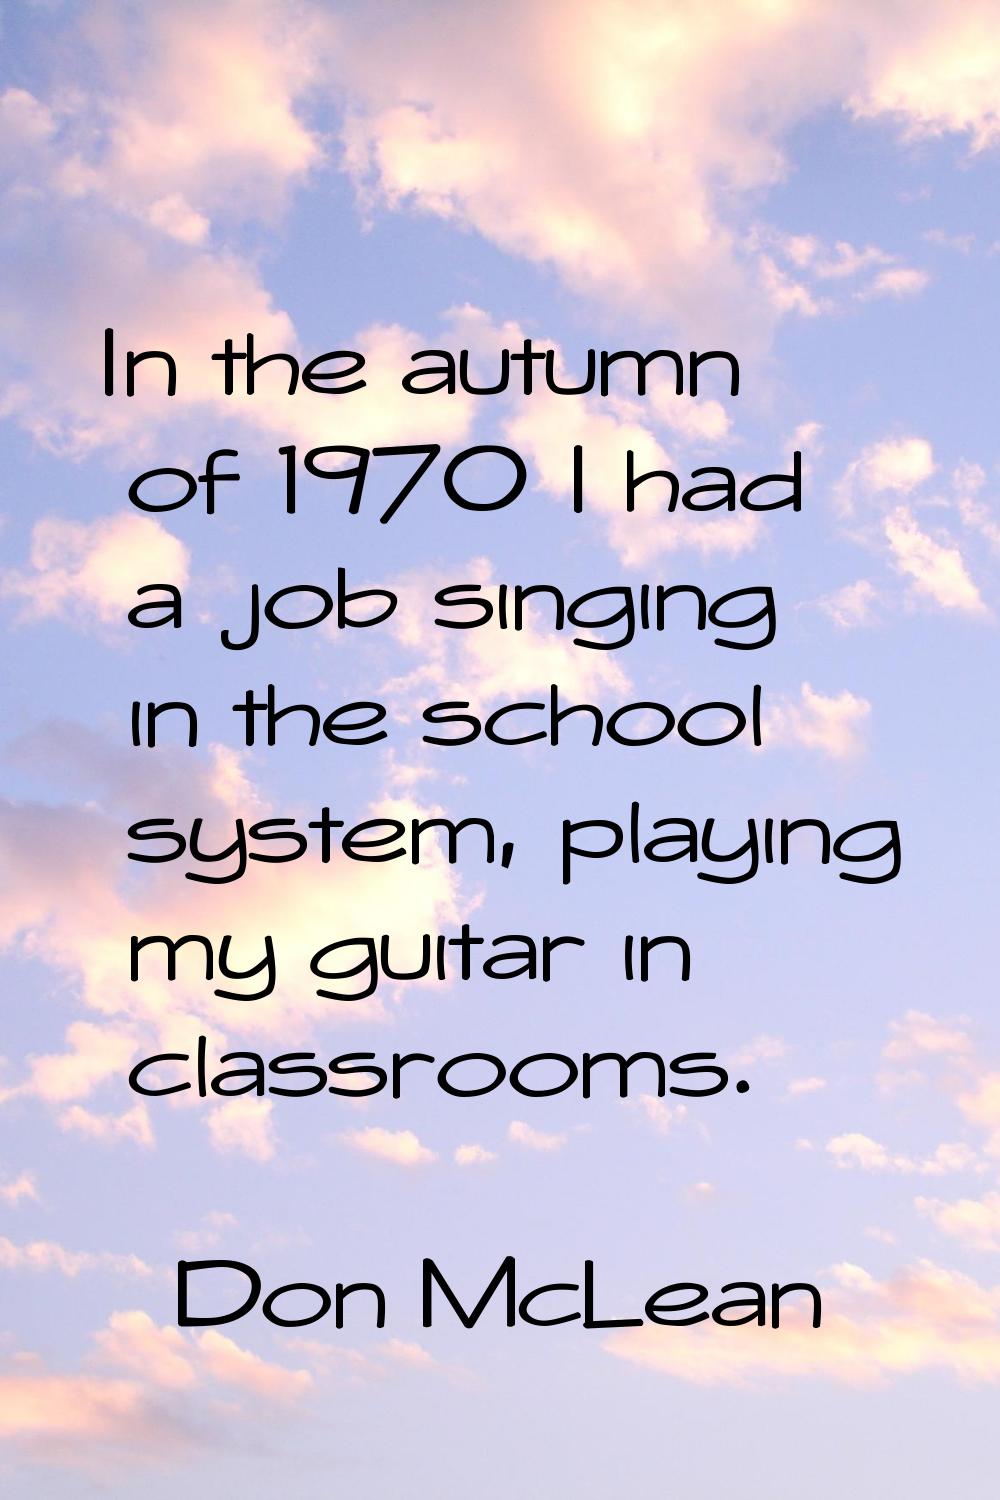 In the autumn of 1970 I had a job singing in the school system, playing my guitar in classrooms.